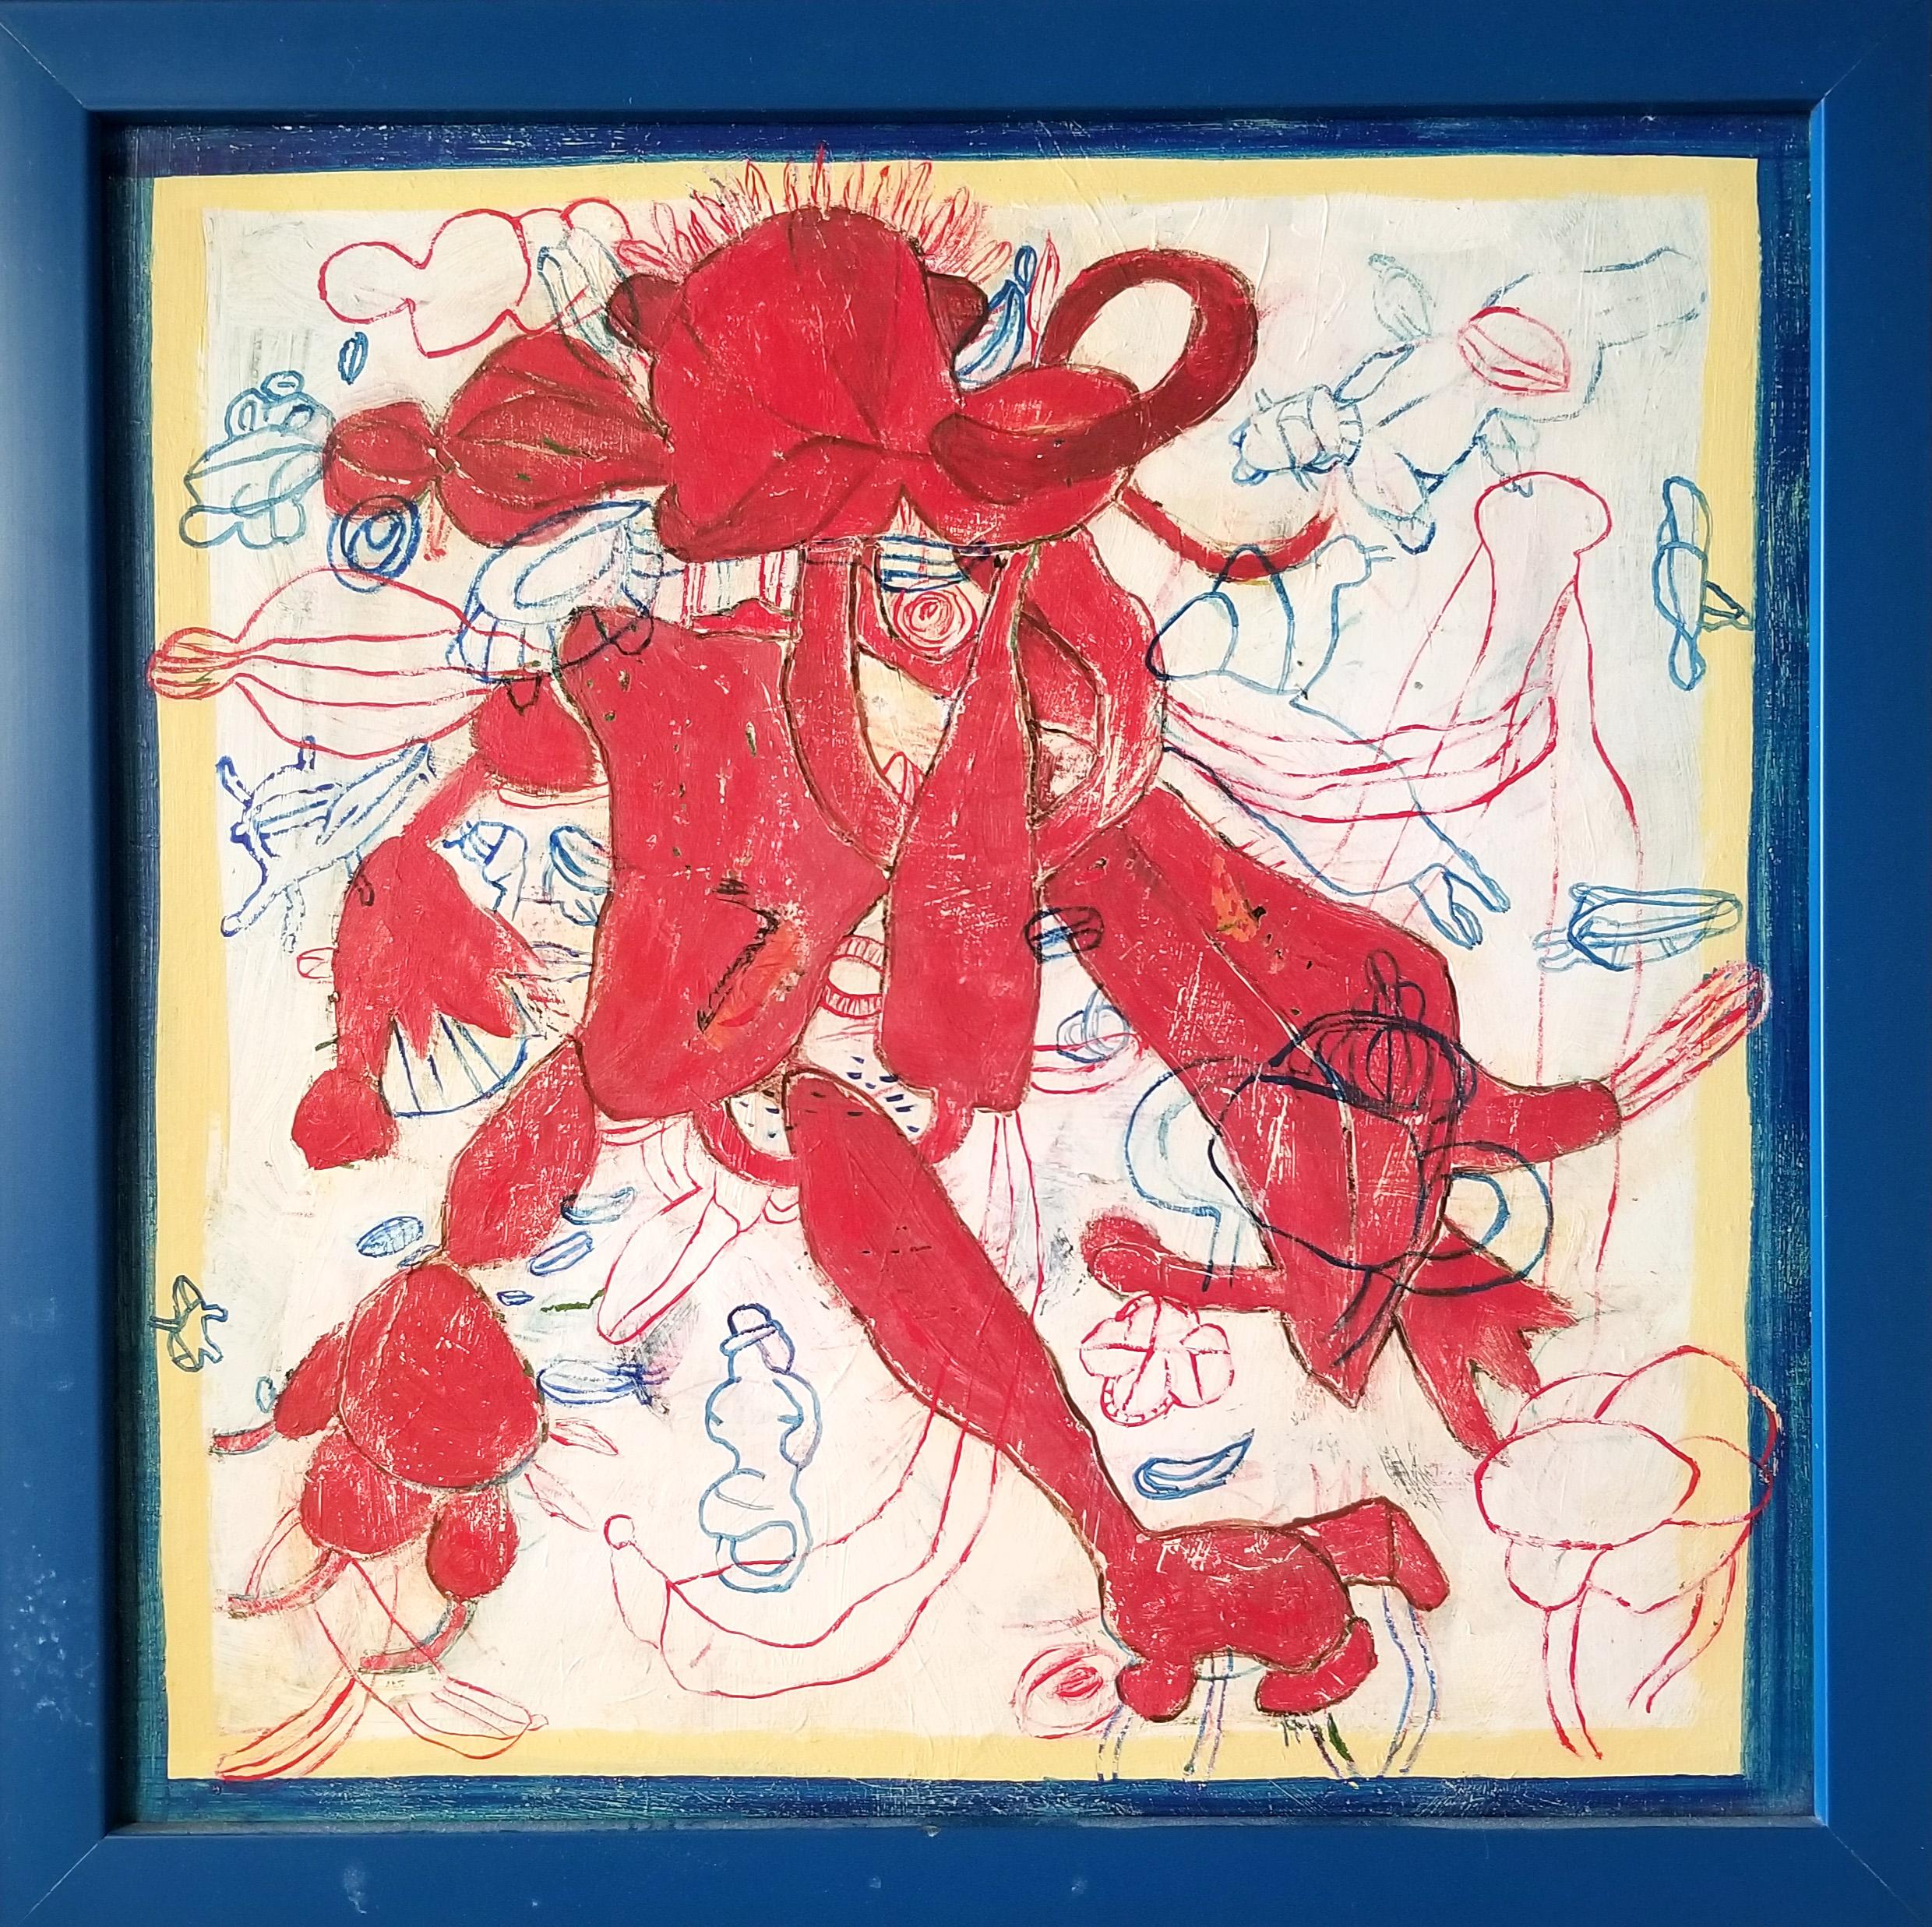 Peter J. Geise Abstract Painting - Modern Abstract Figurative Expressionistic Painting, "Red Golem" 1999